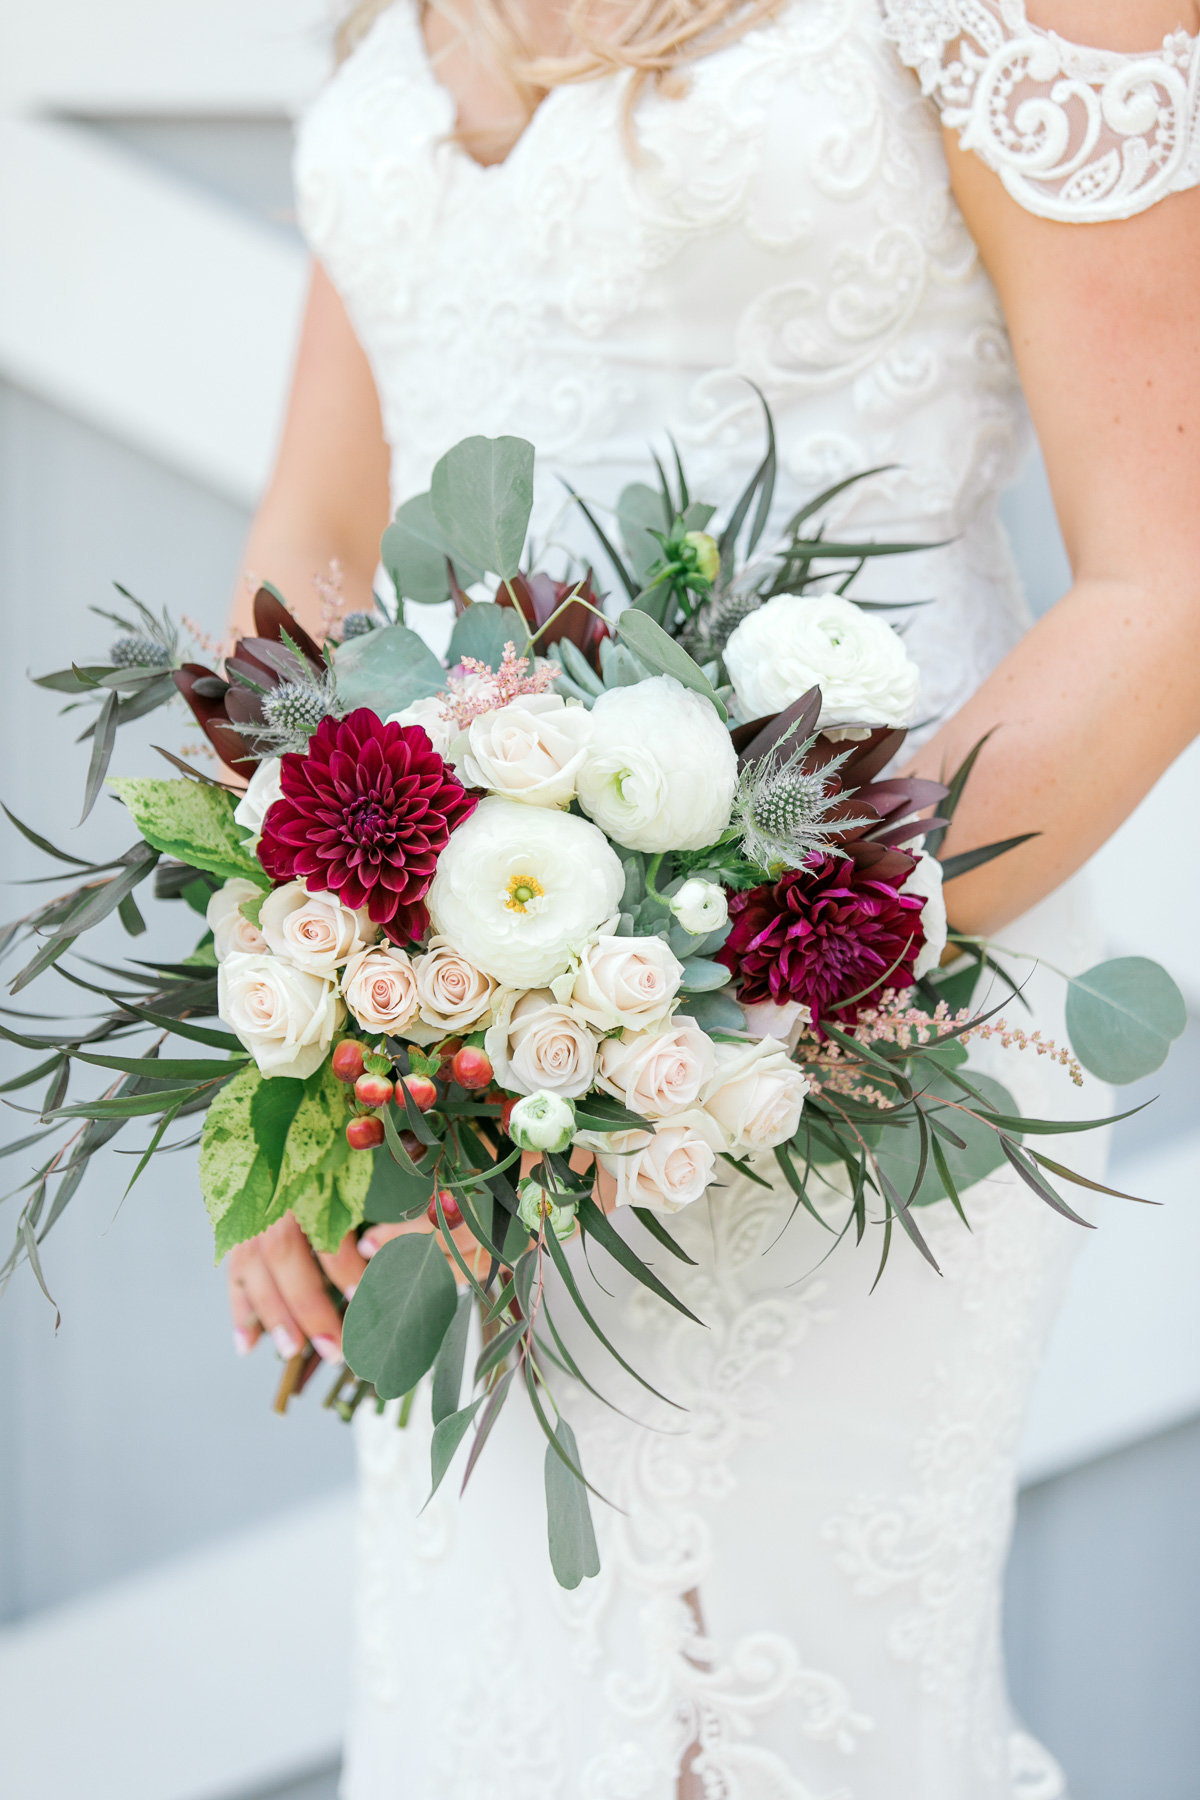 red and white wedding bouquet